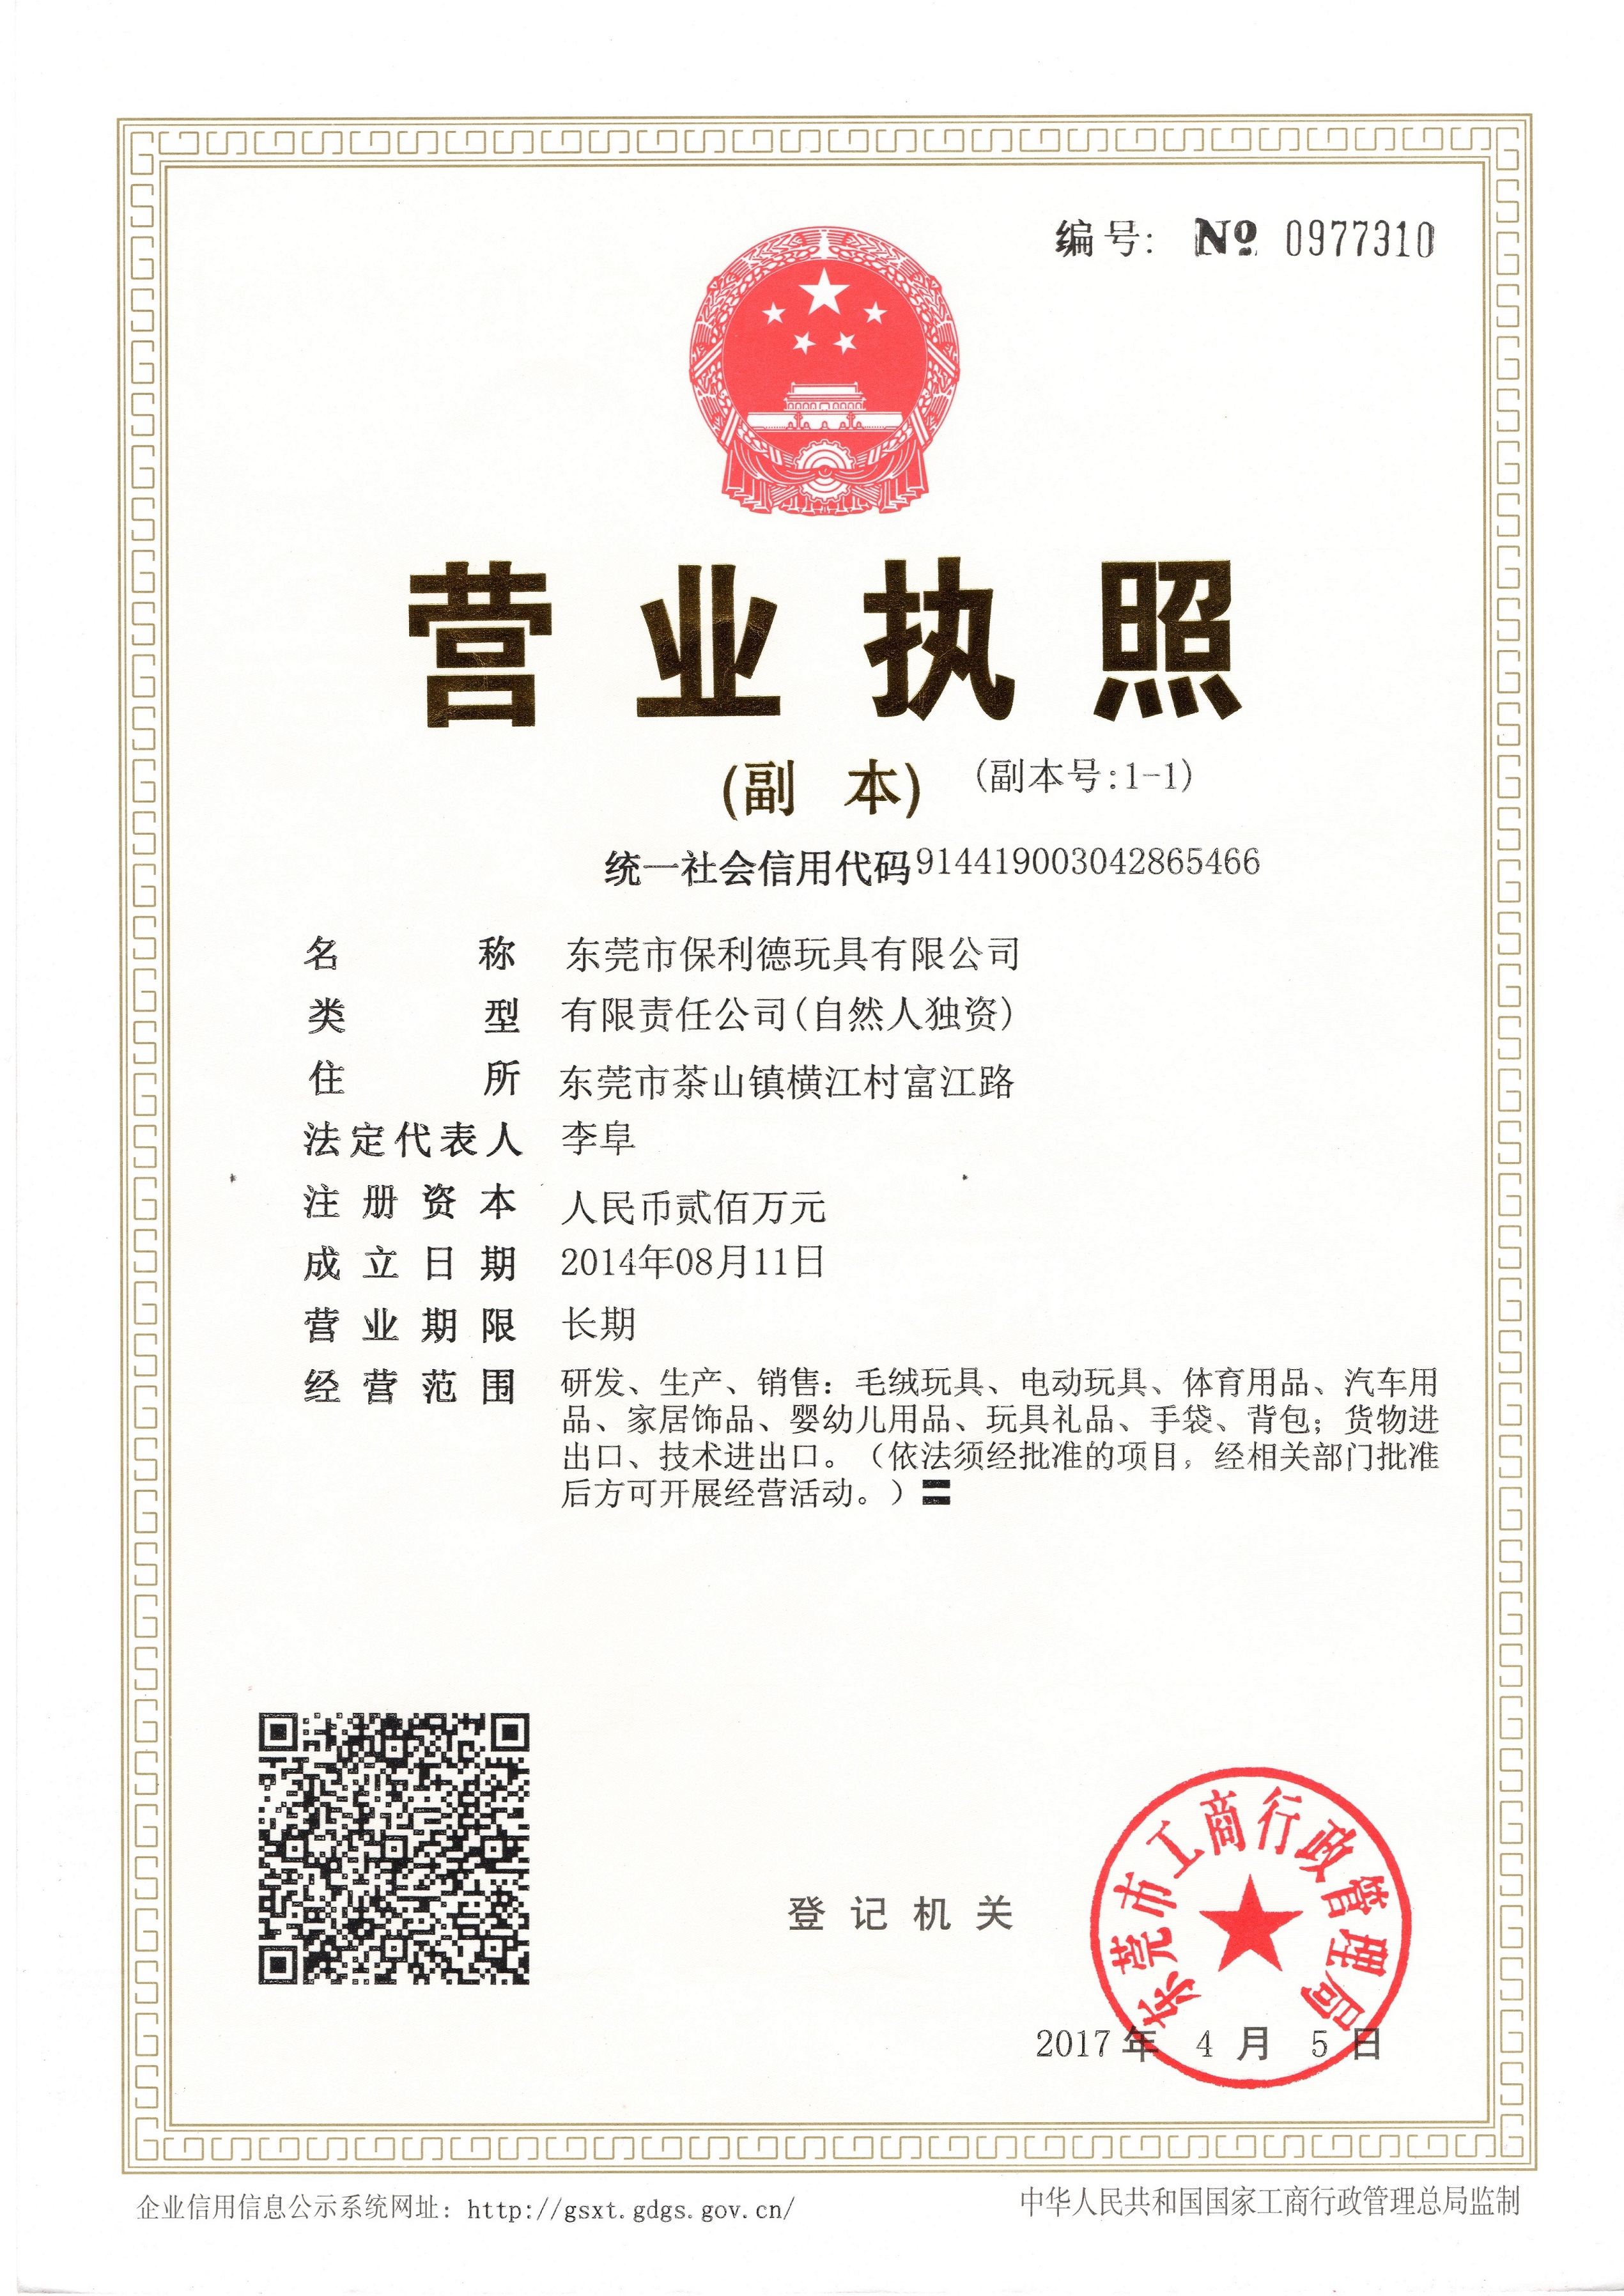  Business License of Paolide Toy 